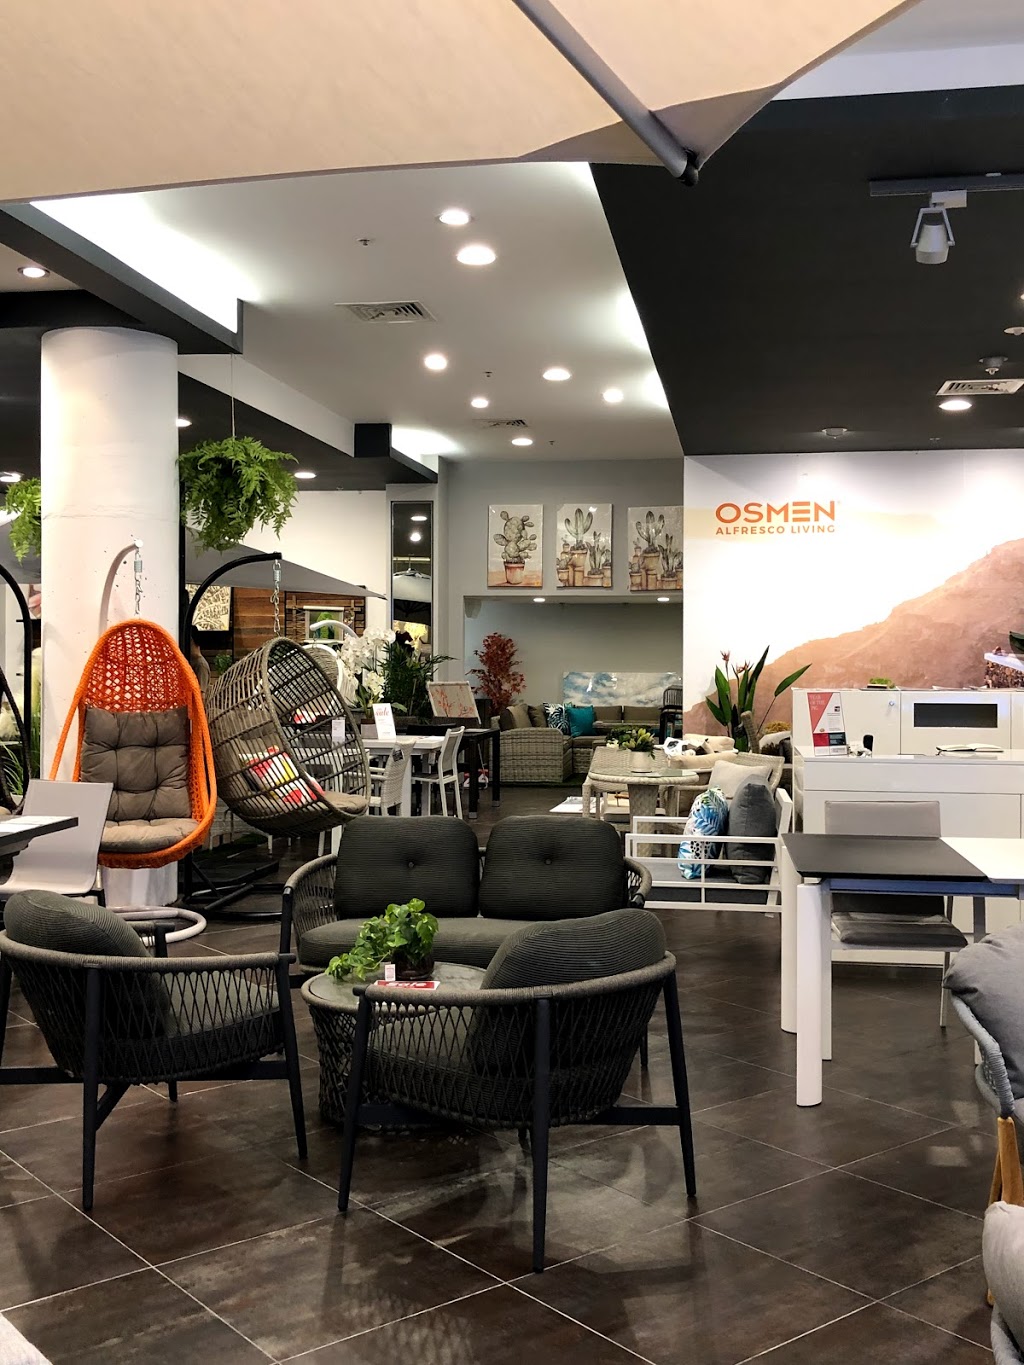 Osmen Outdoor Furniture Chatswood Furniture Store Chase